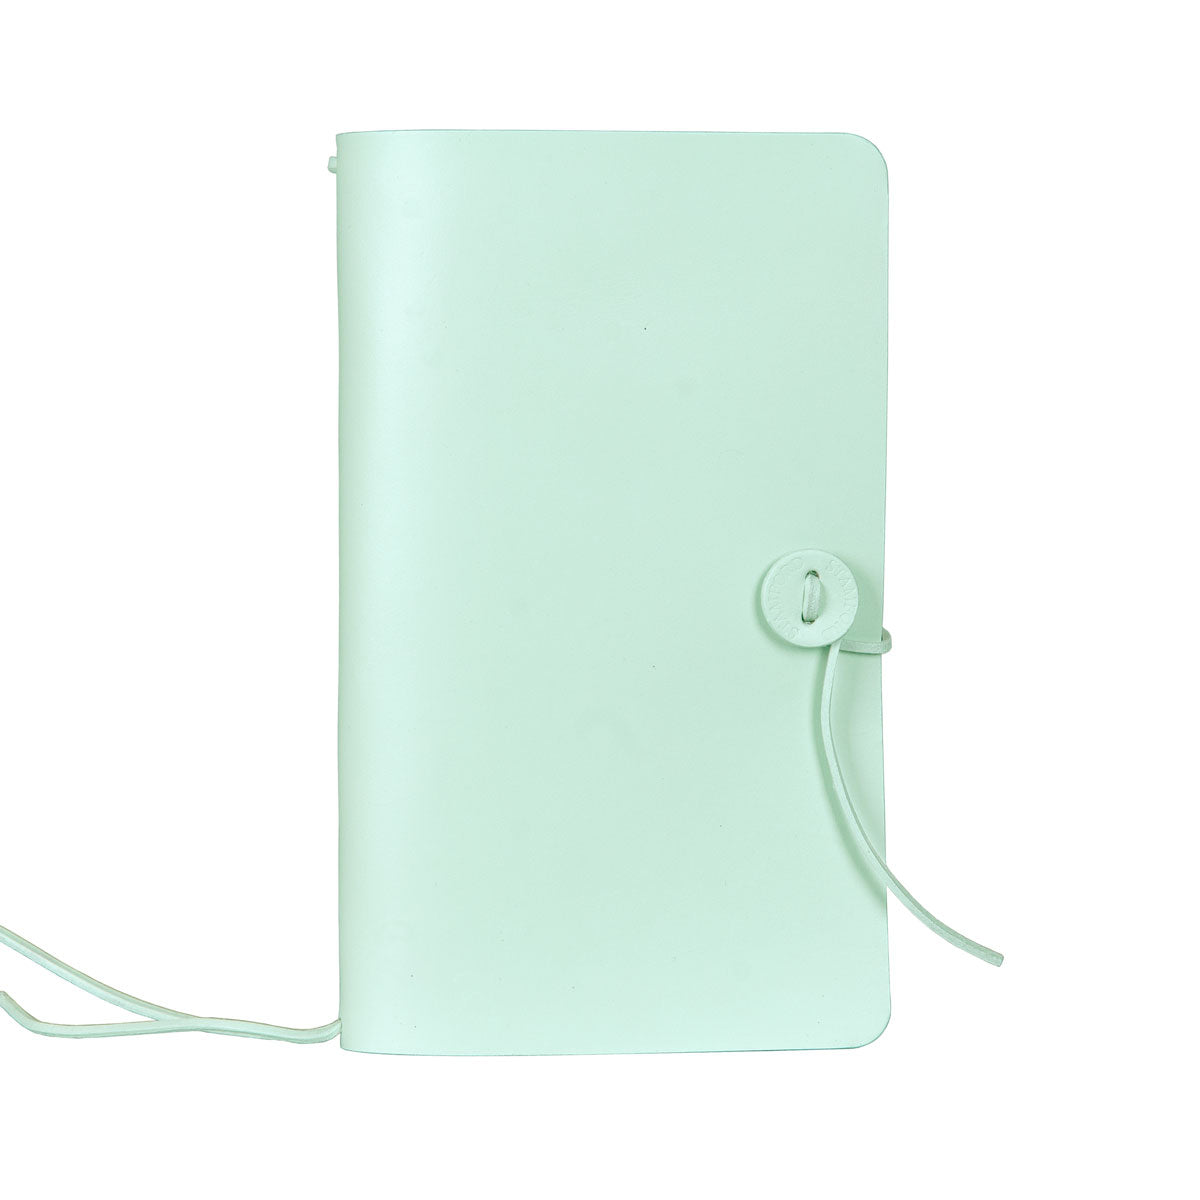 Mint refillable leather travellers journal